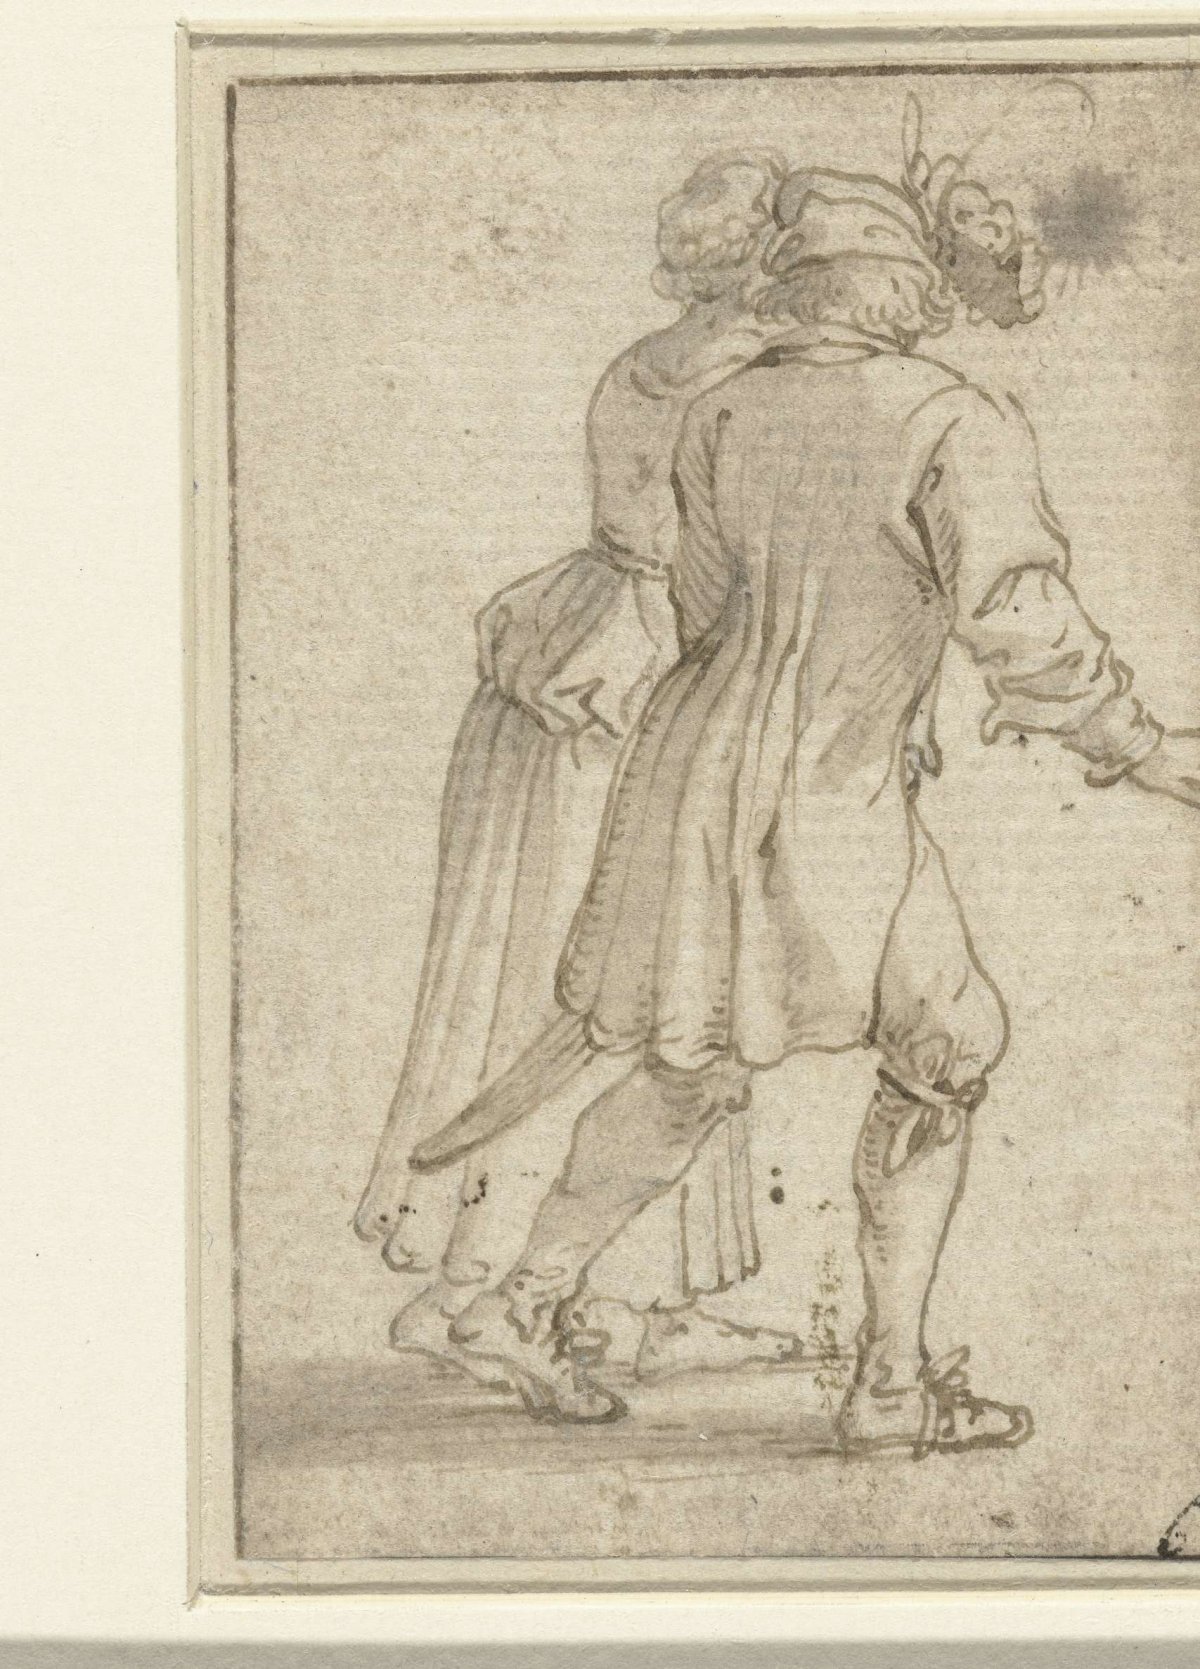 A walking or dancing couple, Jacob Roos, 1600 - 1760